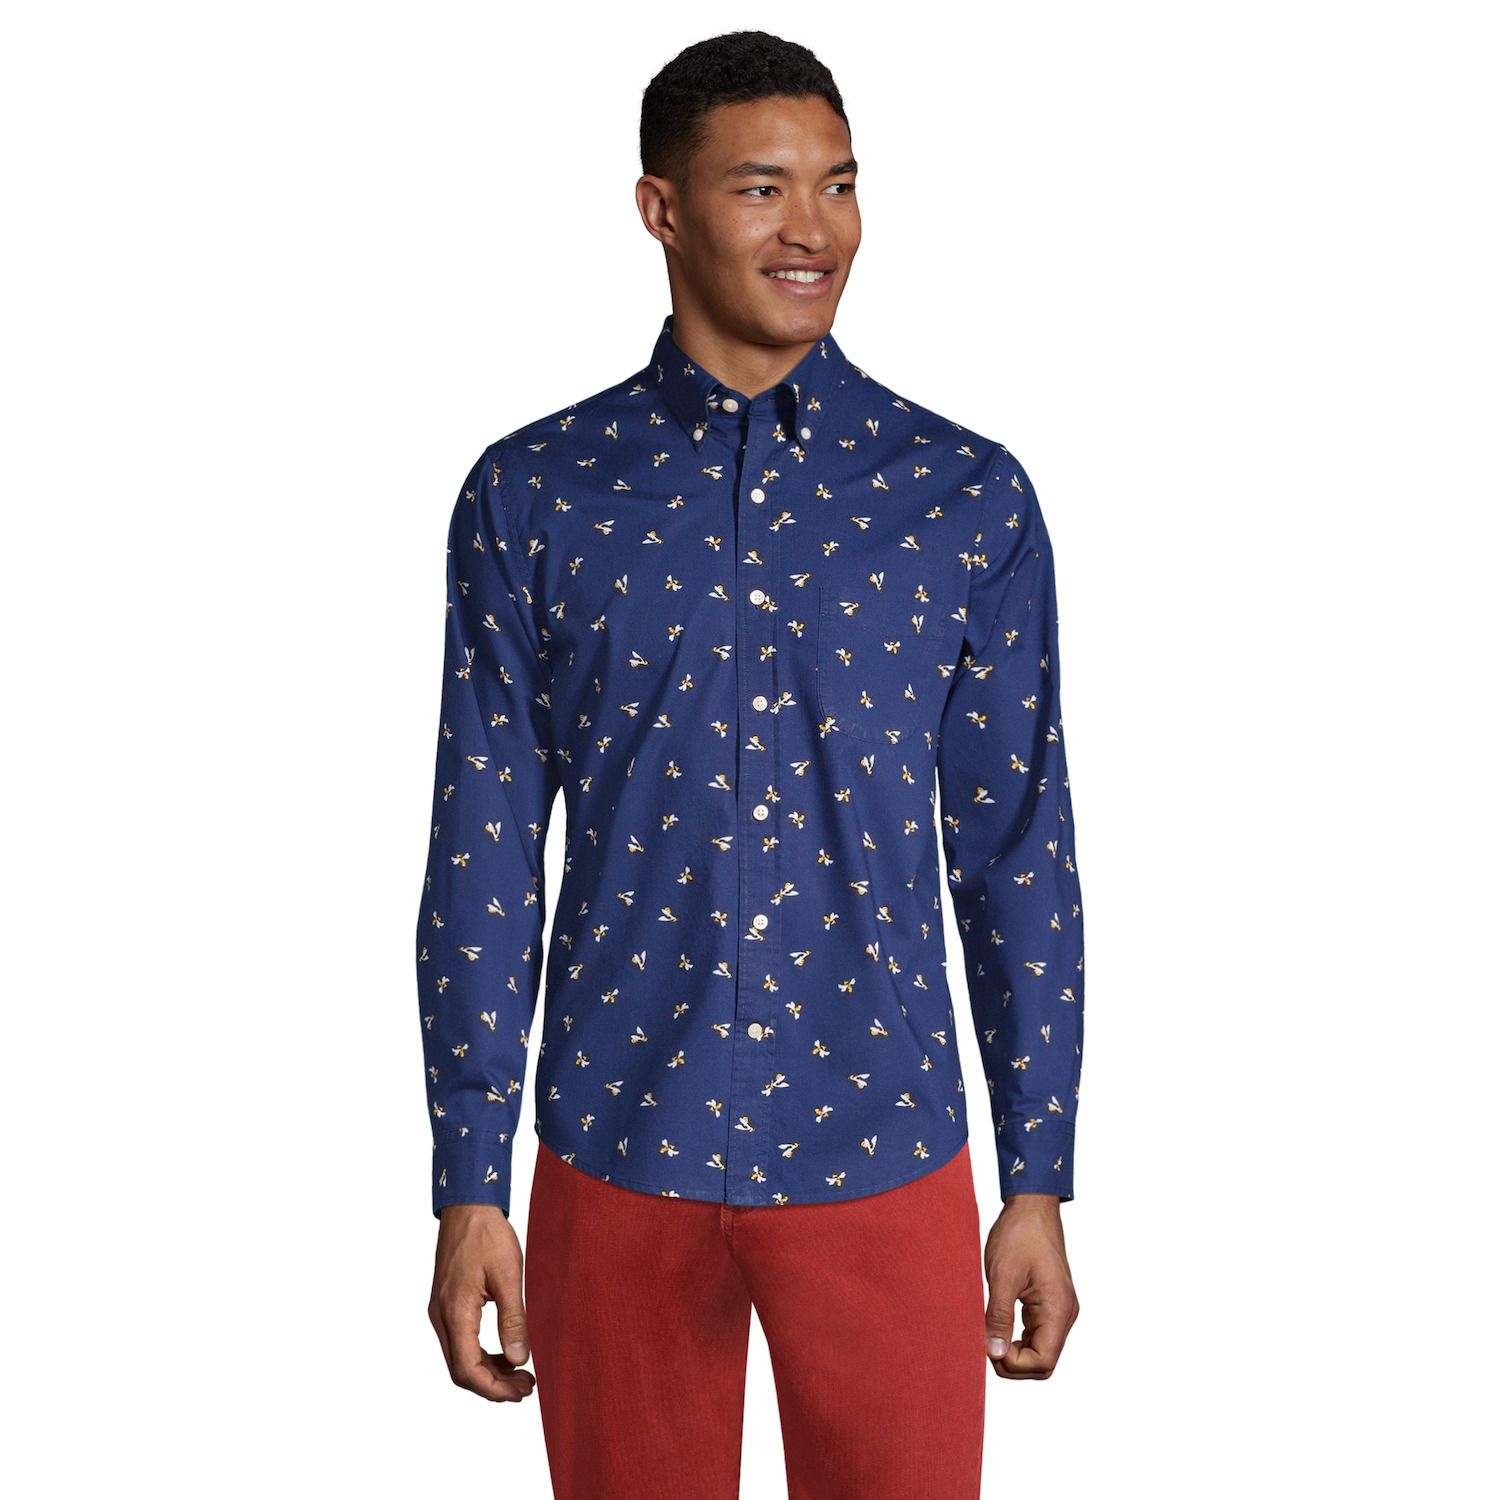 Image for Lands' End Big & Tall Essential Lightweight Poplin Button-Down Shirt at Kohl's.